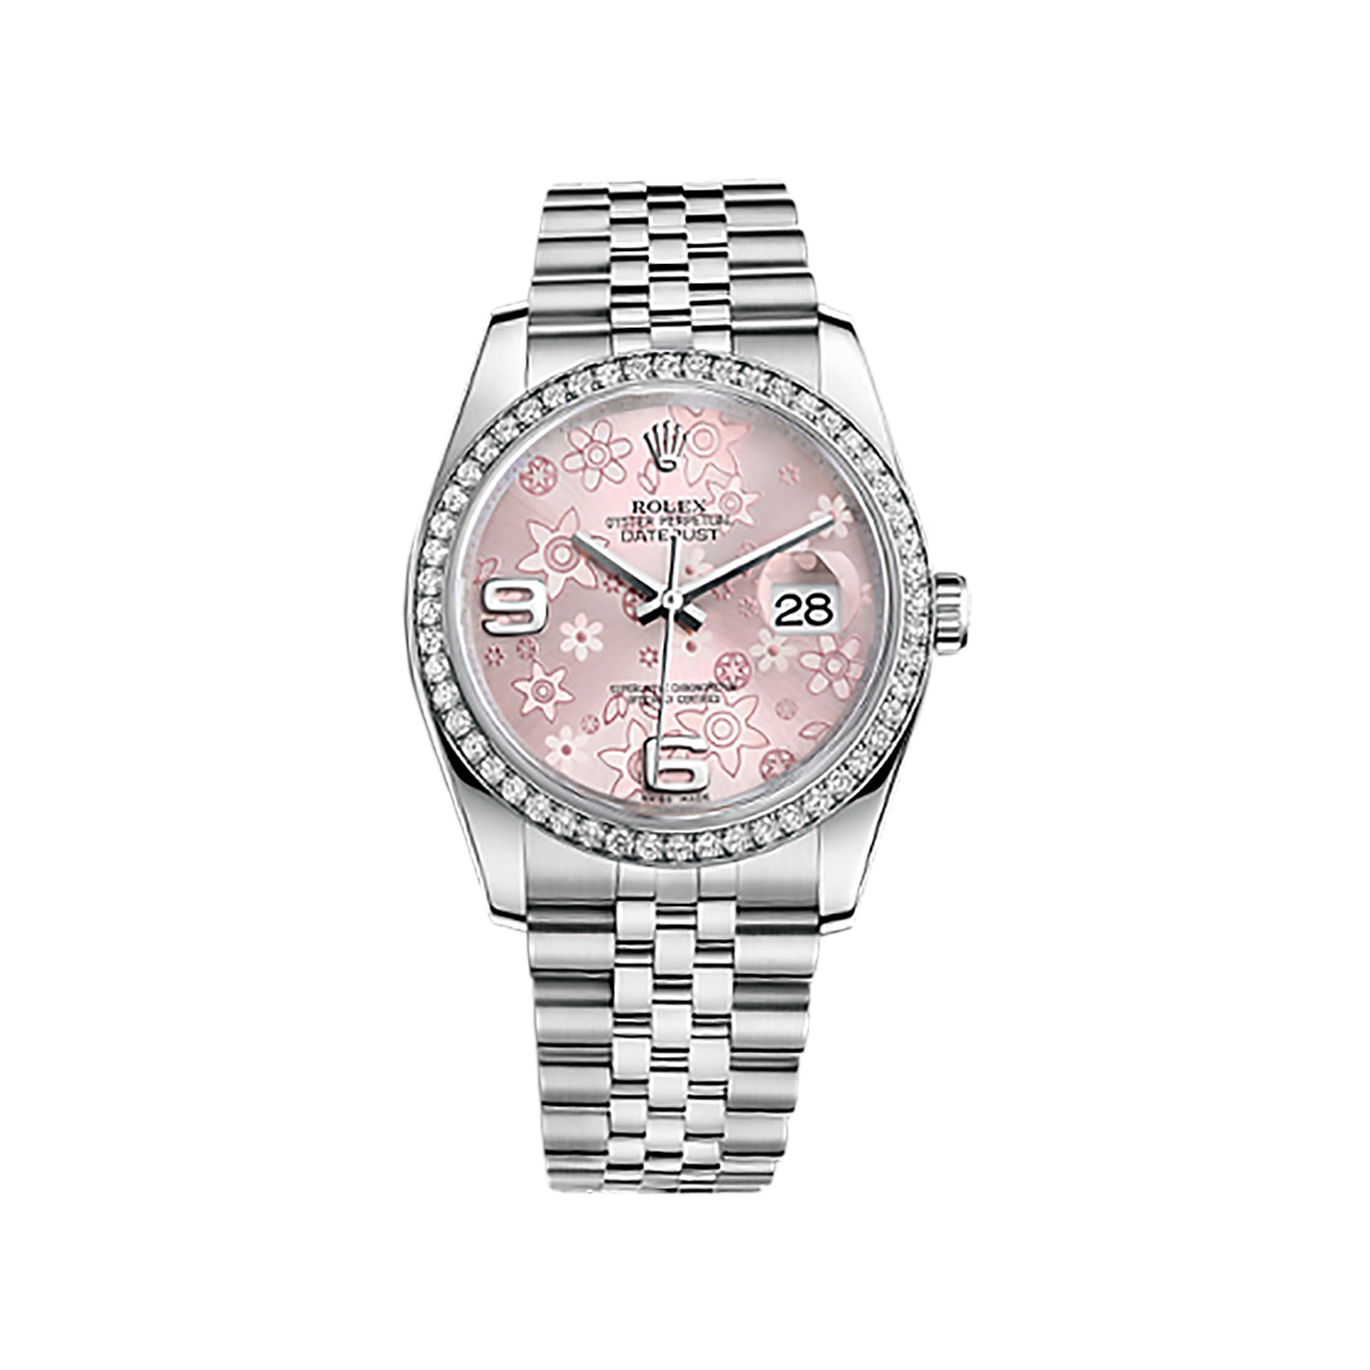 Datejust 36 116244 White Gold & Stainless Steel Watch (Pink Floral Motif)